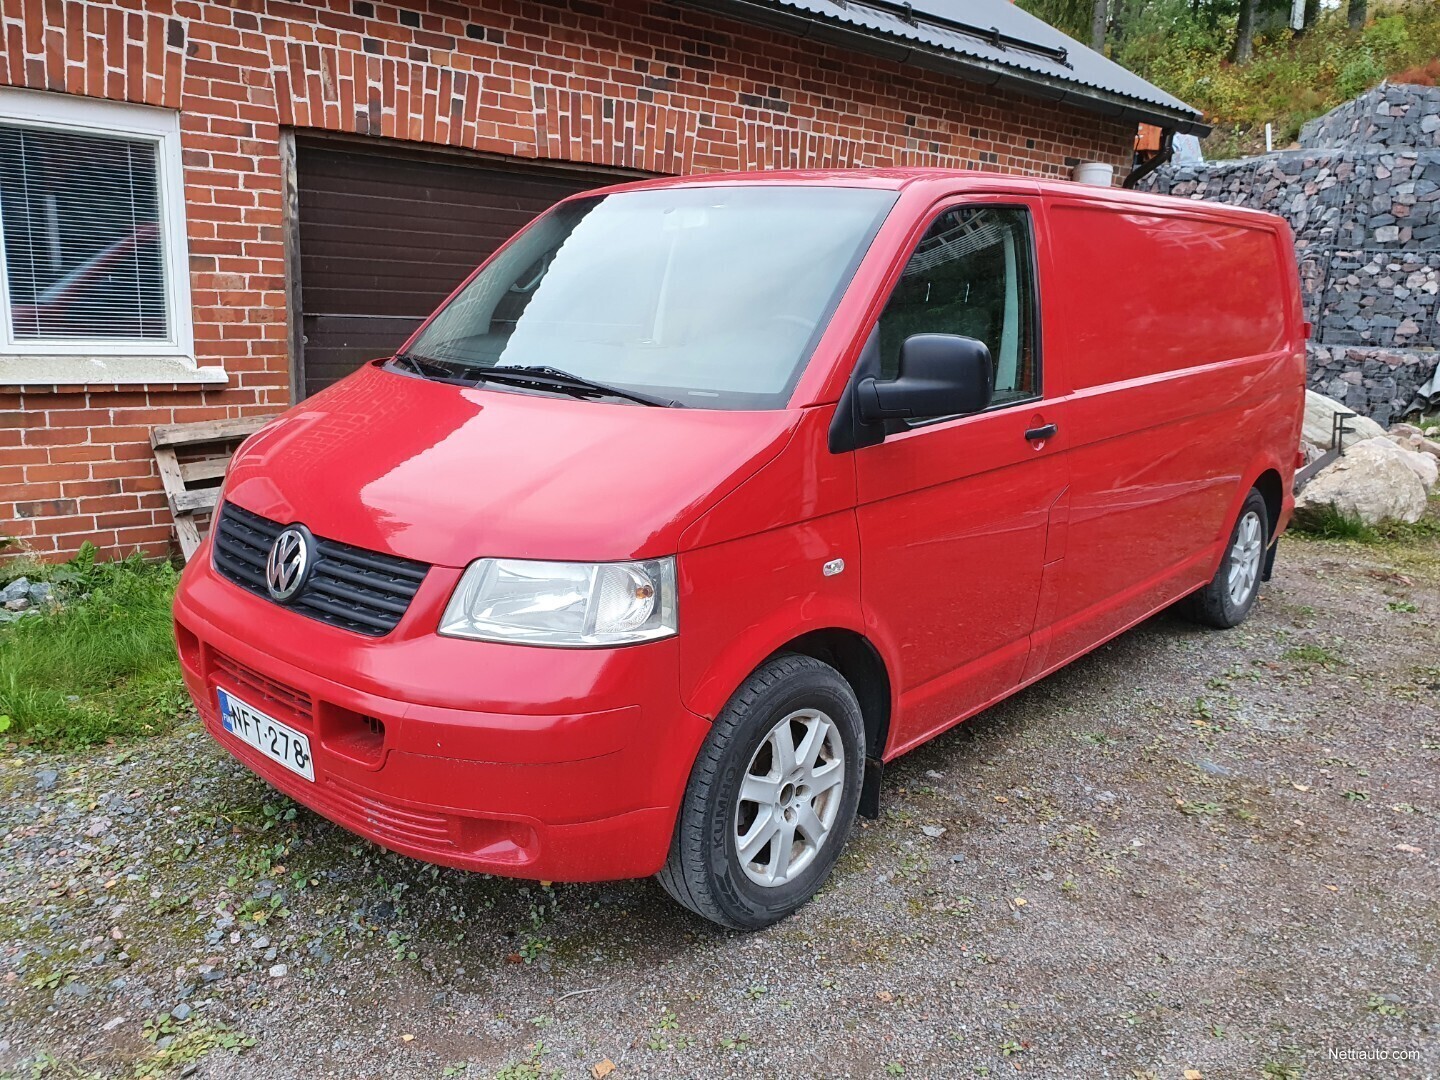 Volkswagen Transporter Umpi p-a pitkä 2.5 TDI 96kw Middle long - Low 2004 -  Used vehicle - Nettiauto